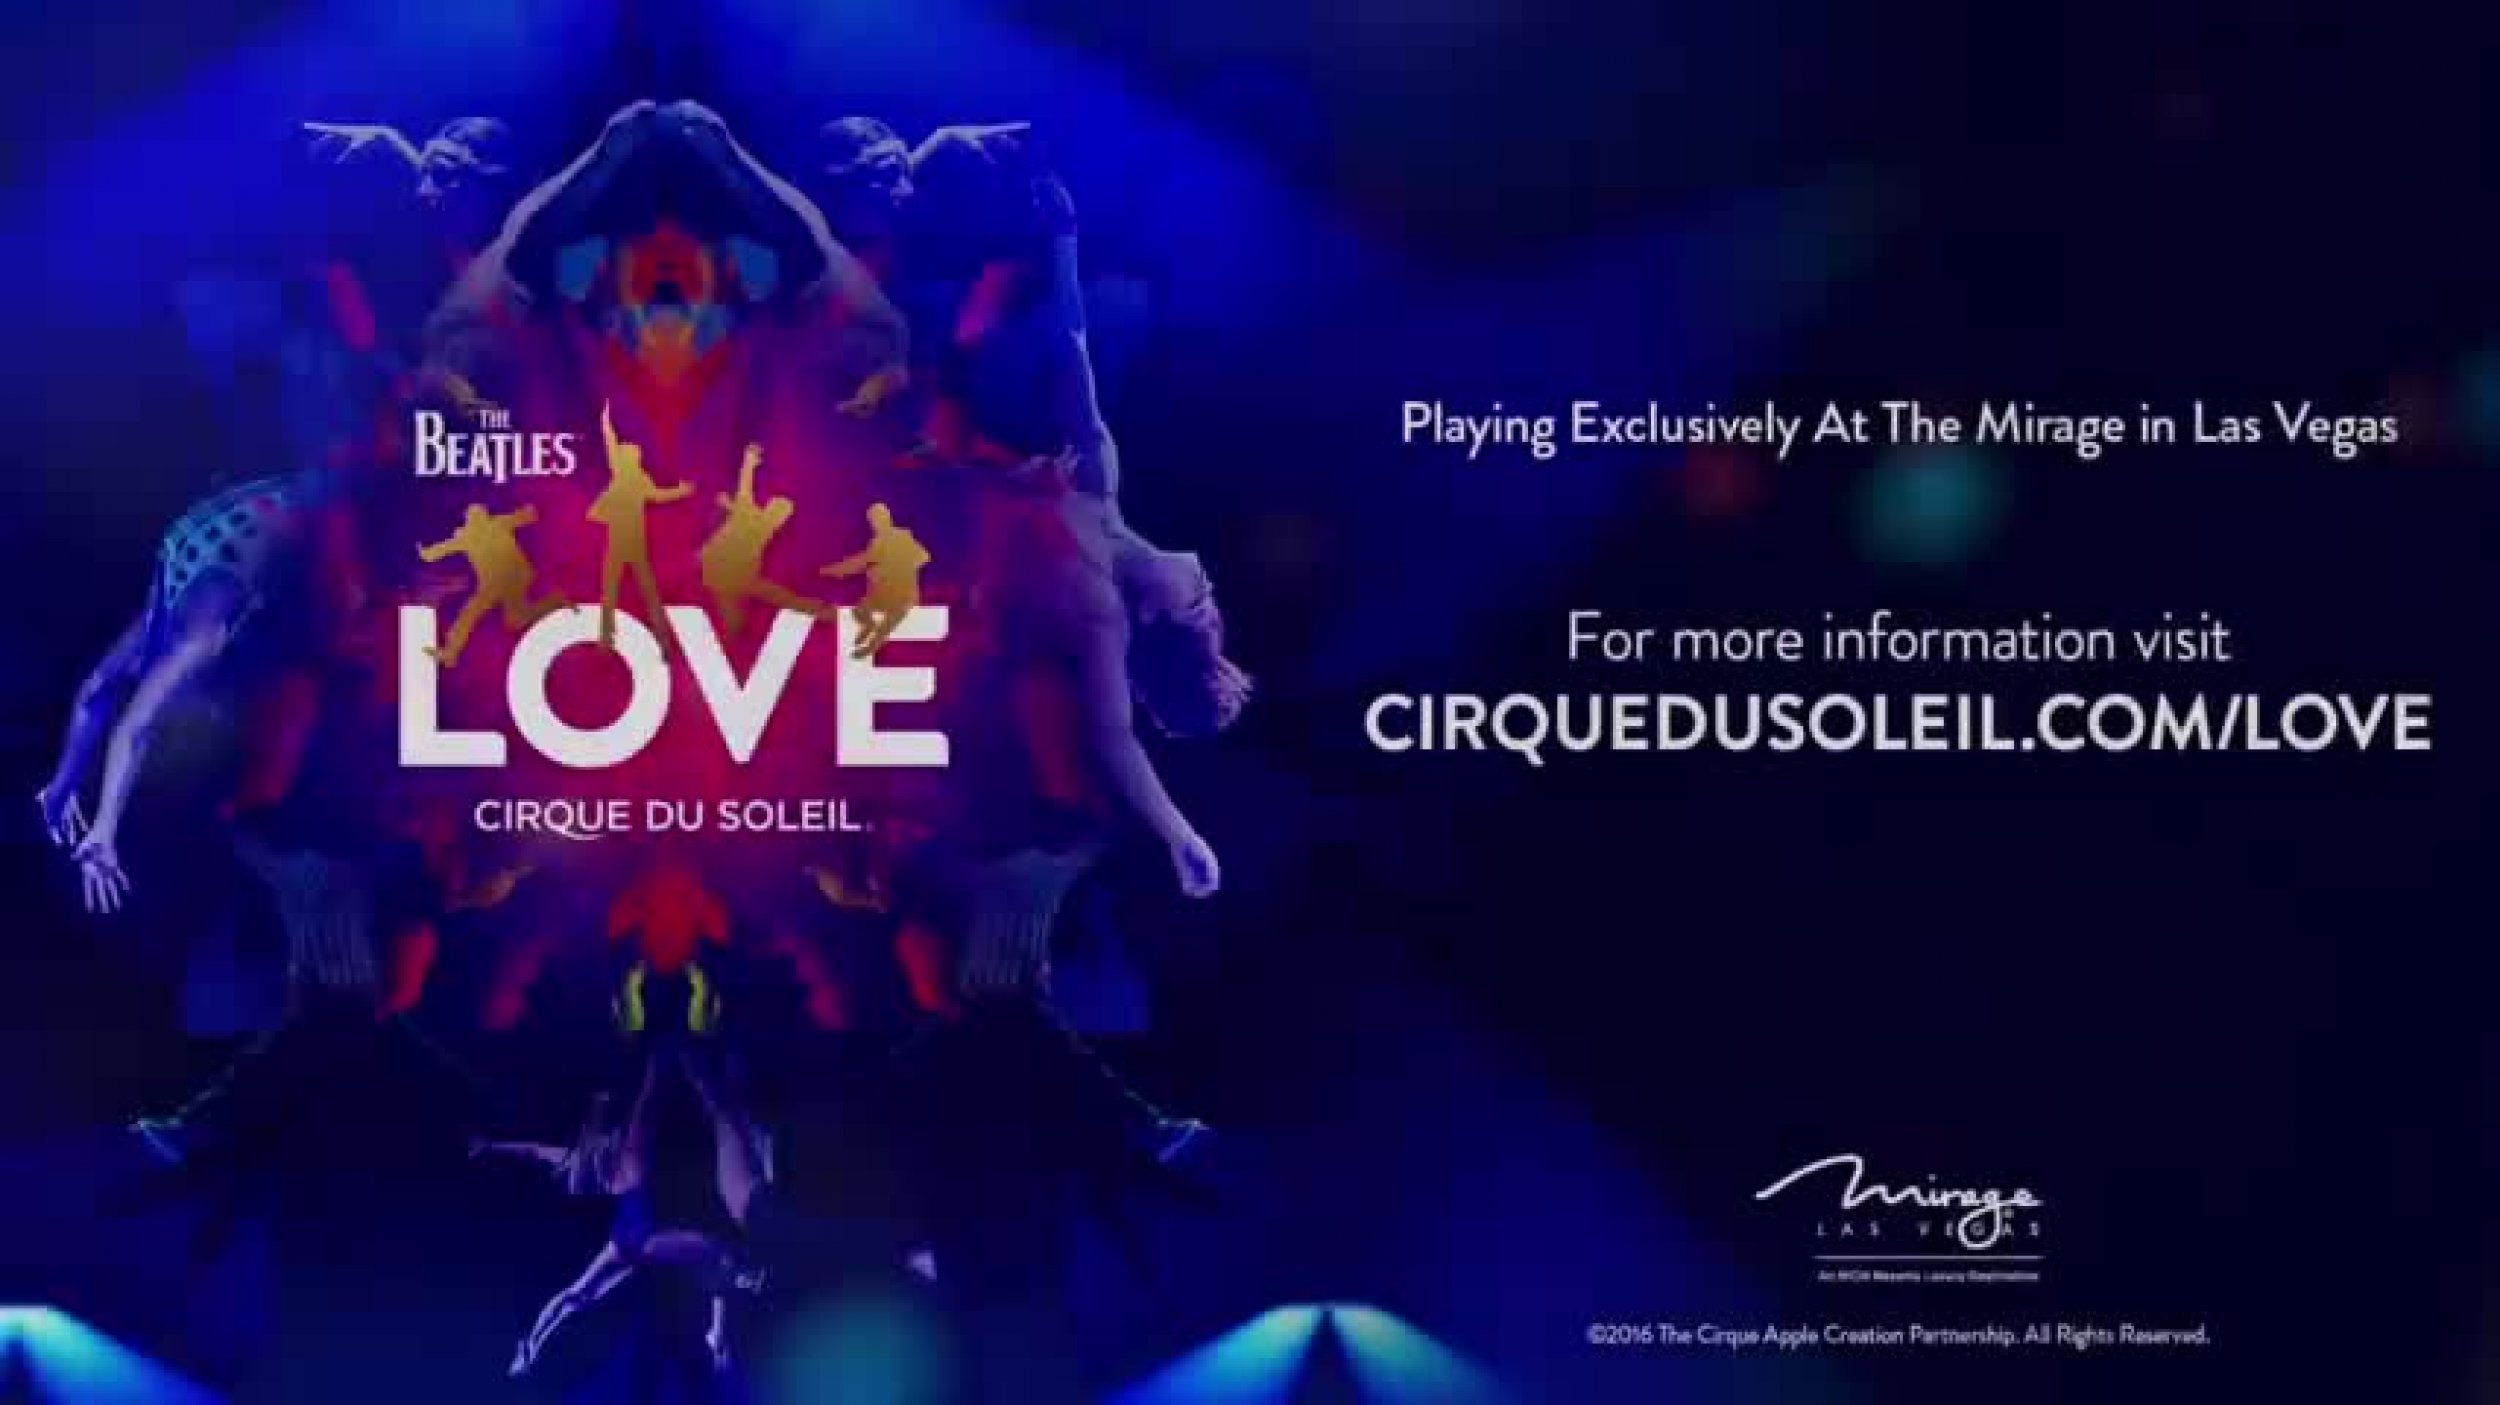 The Beatles LOVE by Cirque du Soleil performing at The Mirage since June 2006